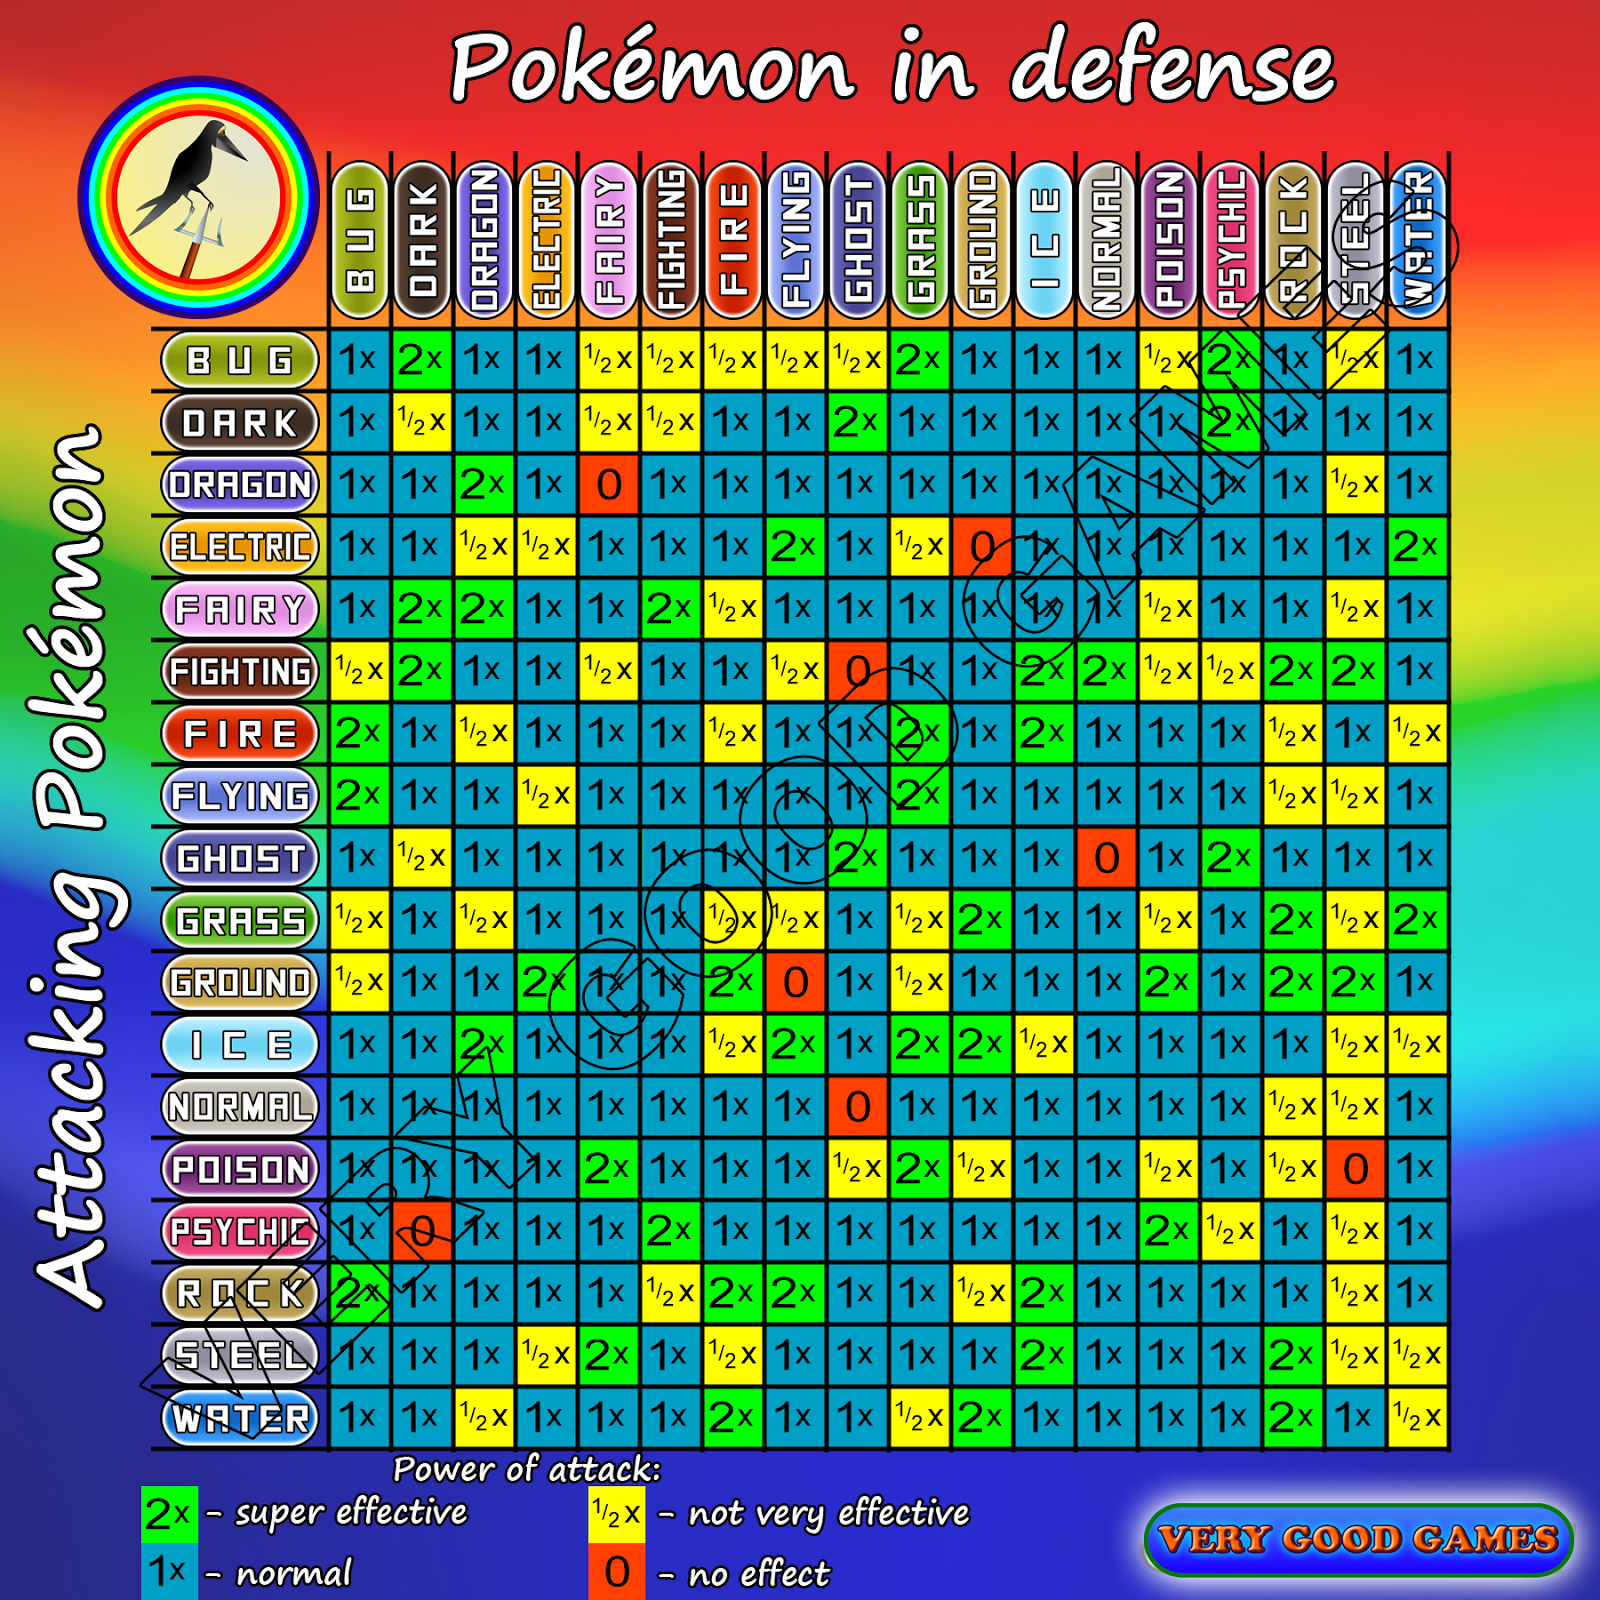 Chart of Pokemon types - their weaknesses and strengths in Pokemon Go